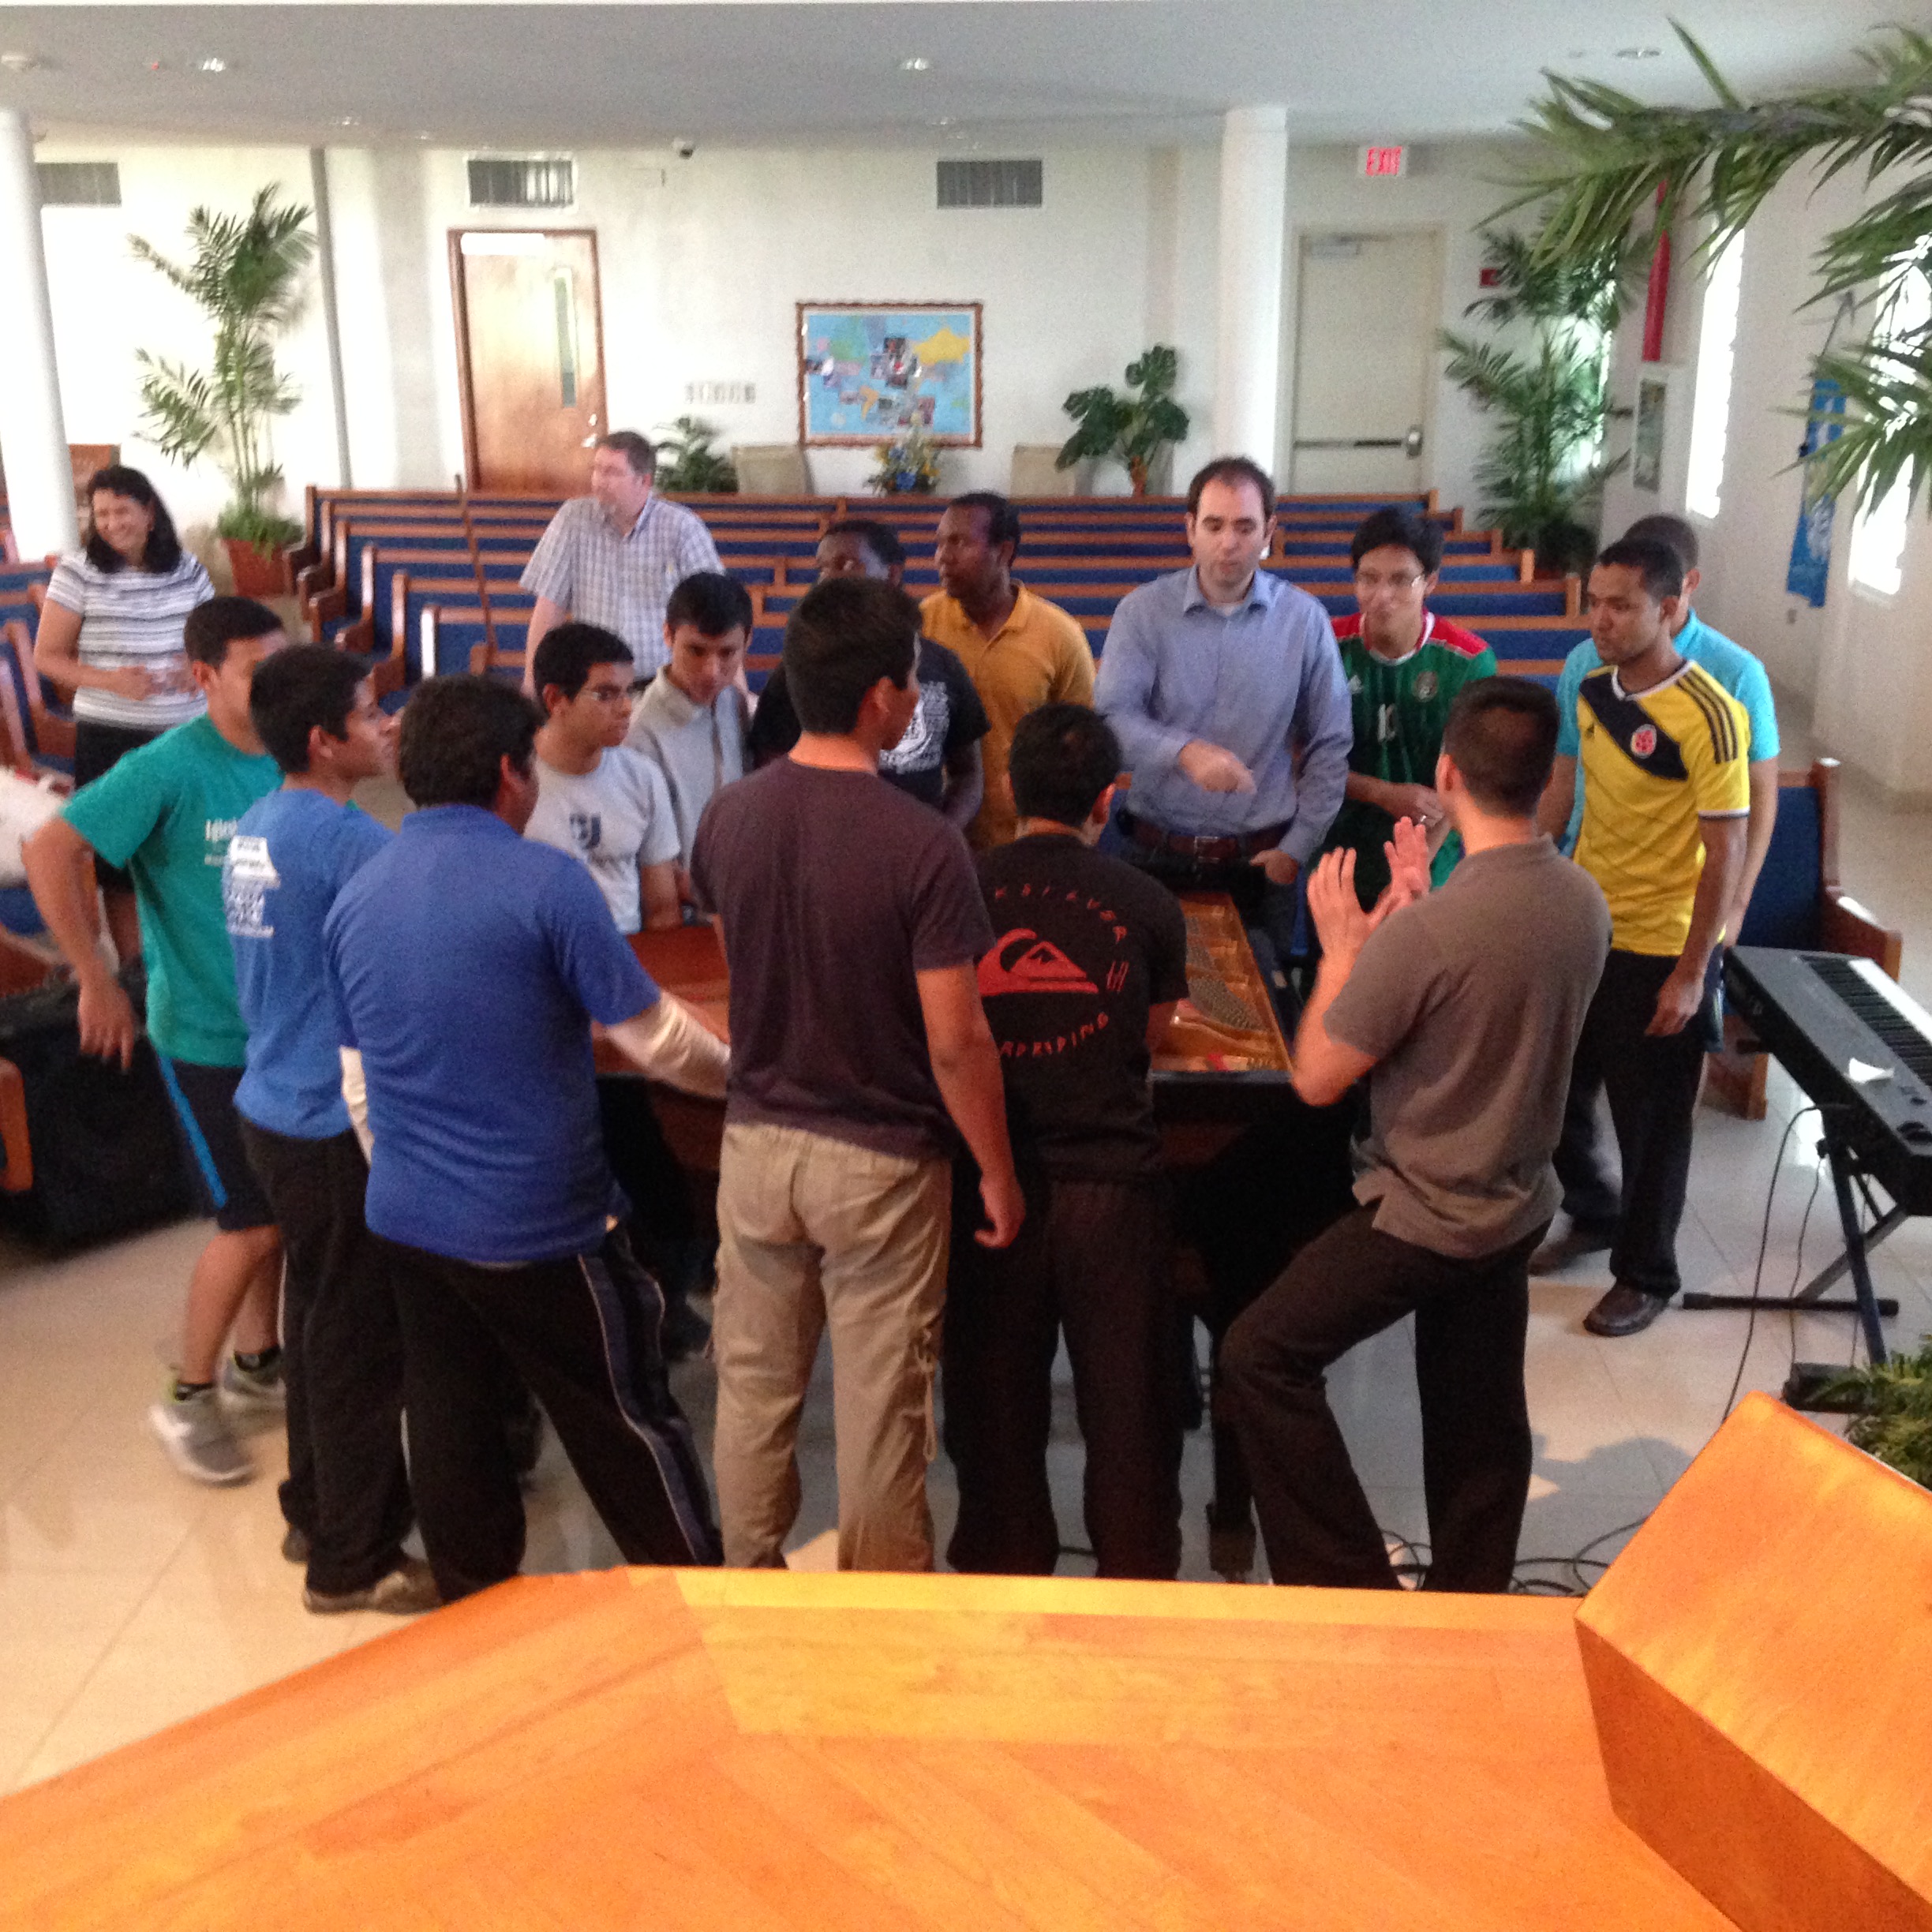 Moving the piano to the platform for the concert.  These guys are all students at Puerto Rico Baptist College.